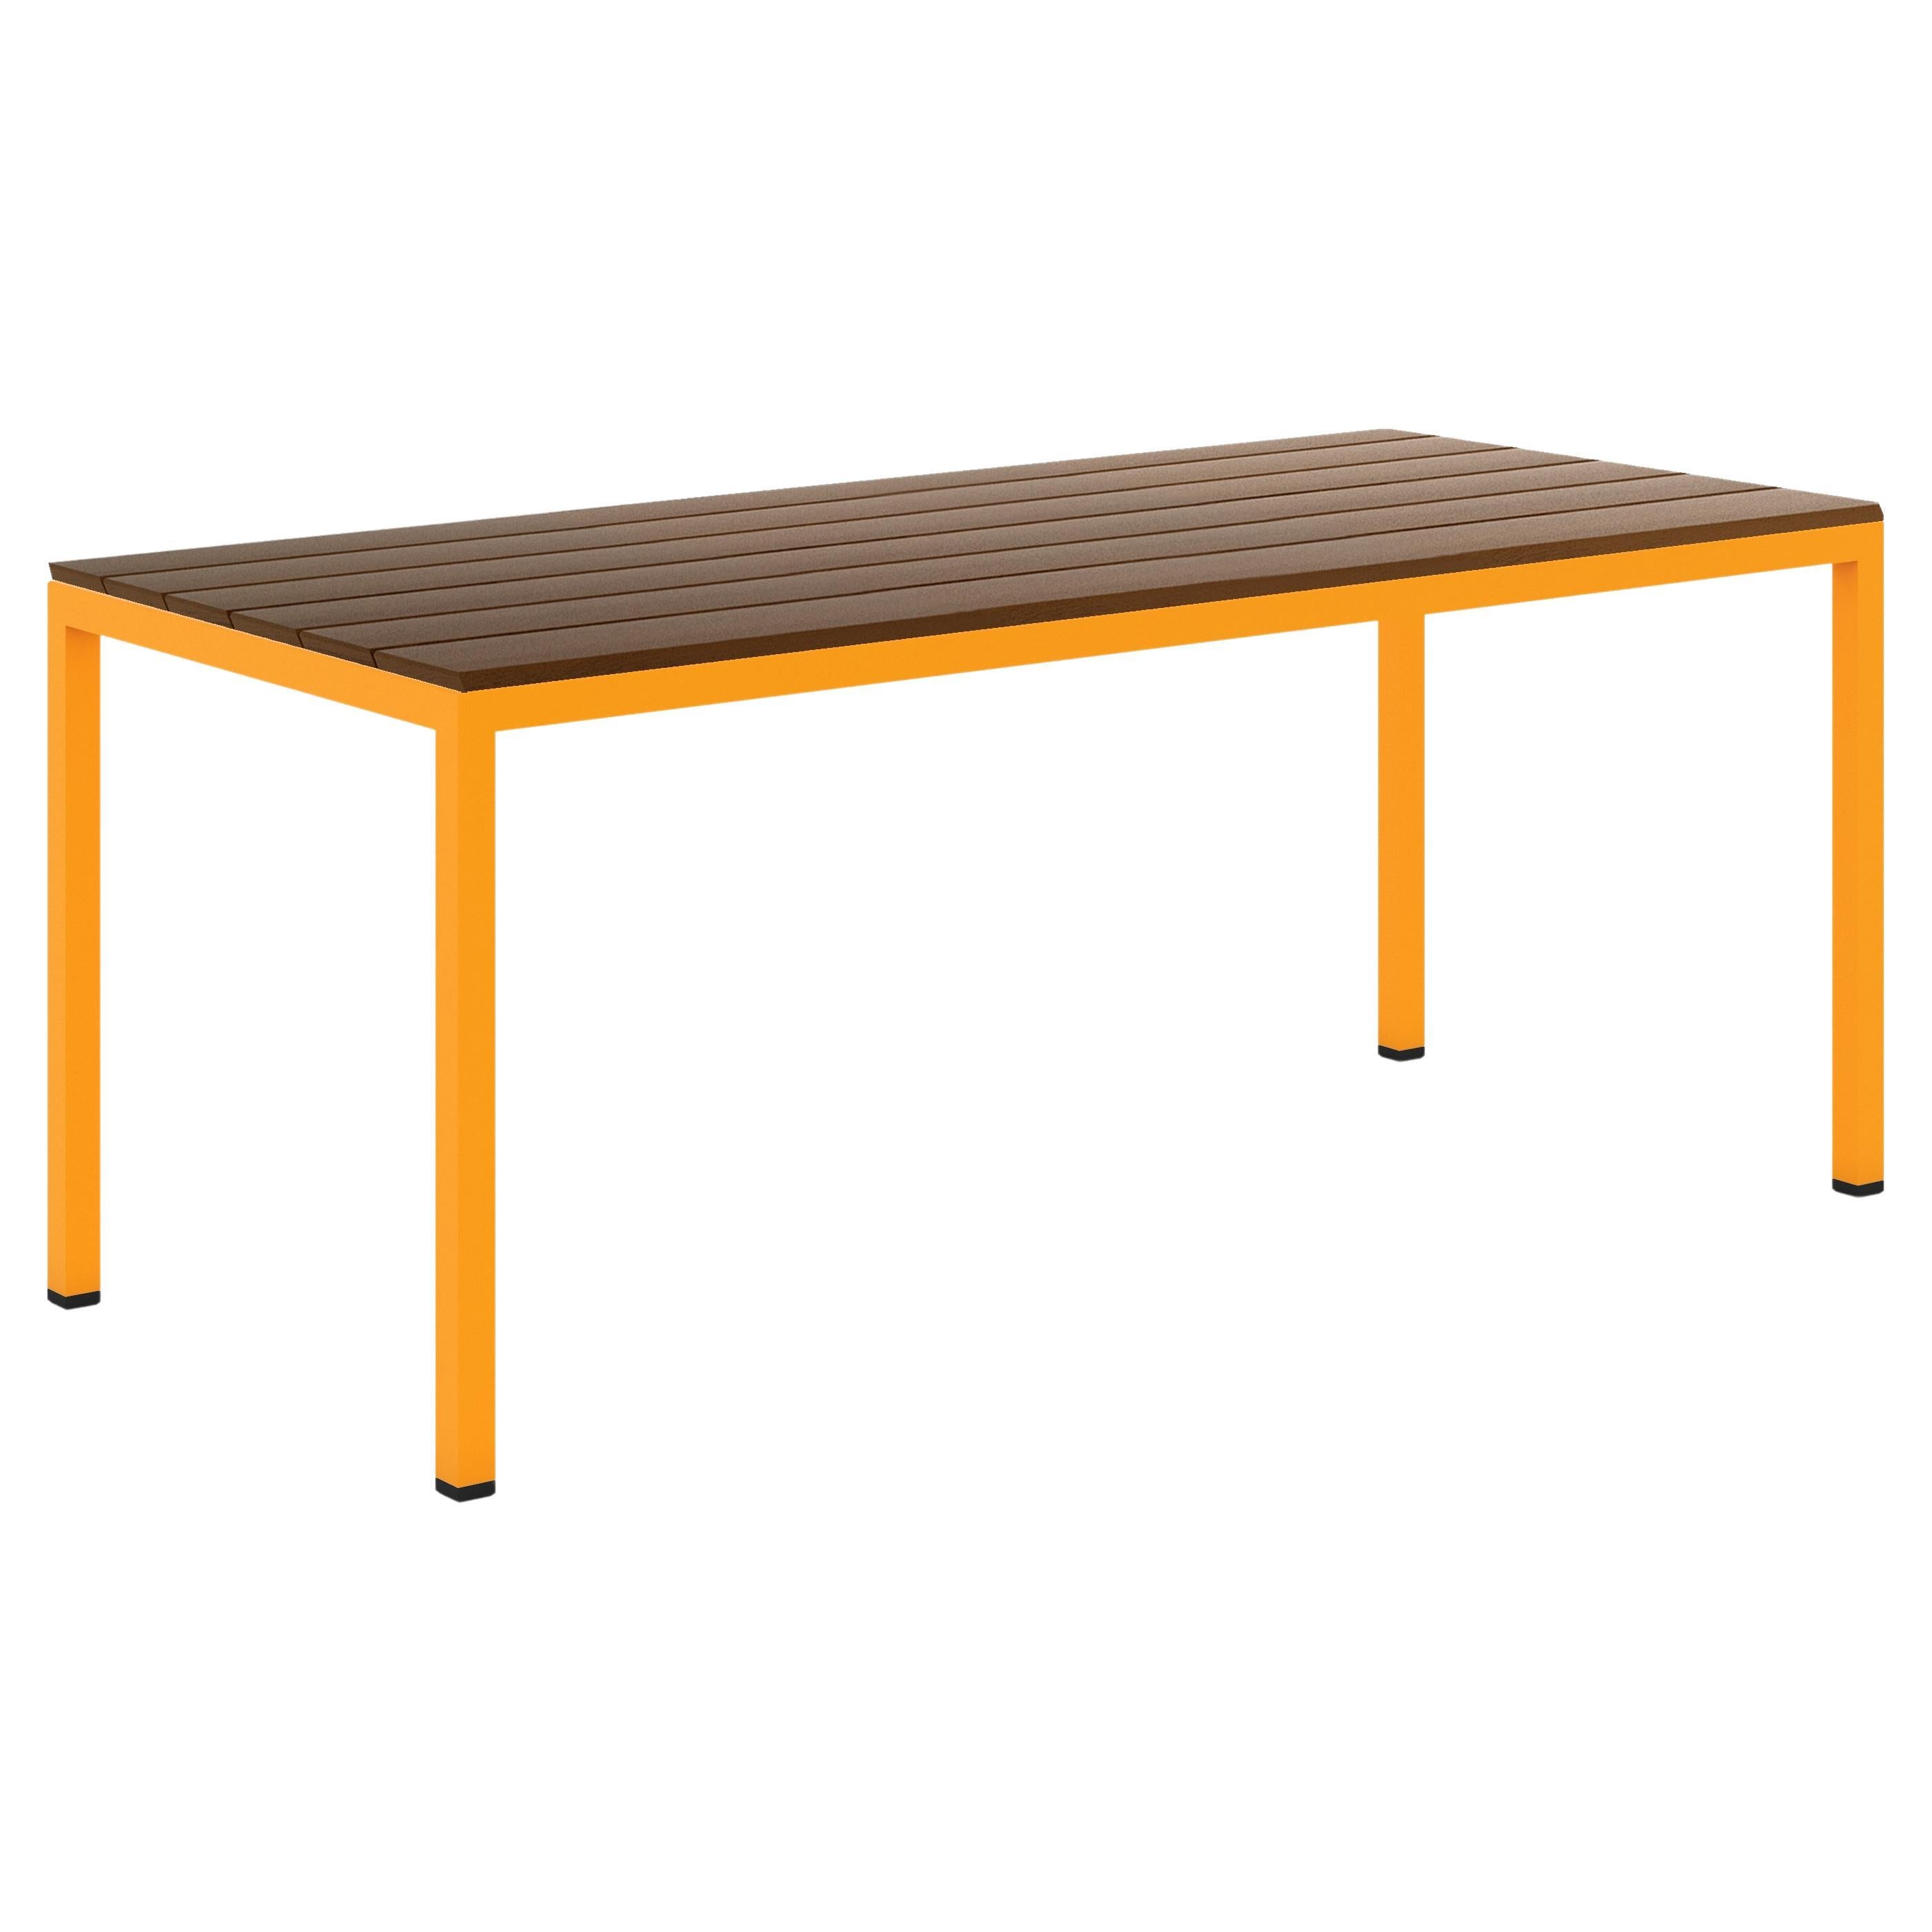 BICAtable Square Modern Outdoor Steel Table in Yellow with Ipê Wood 234x80cm